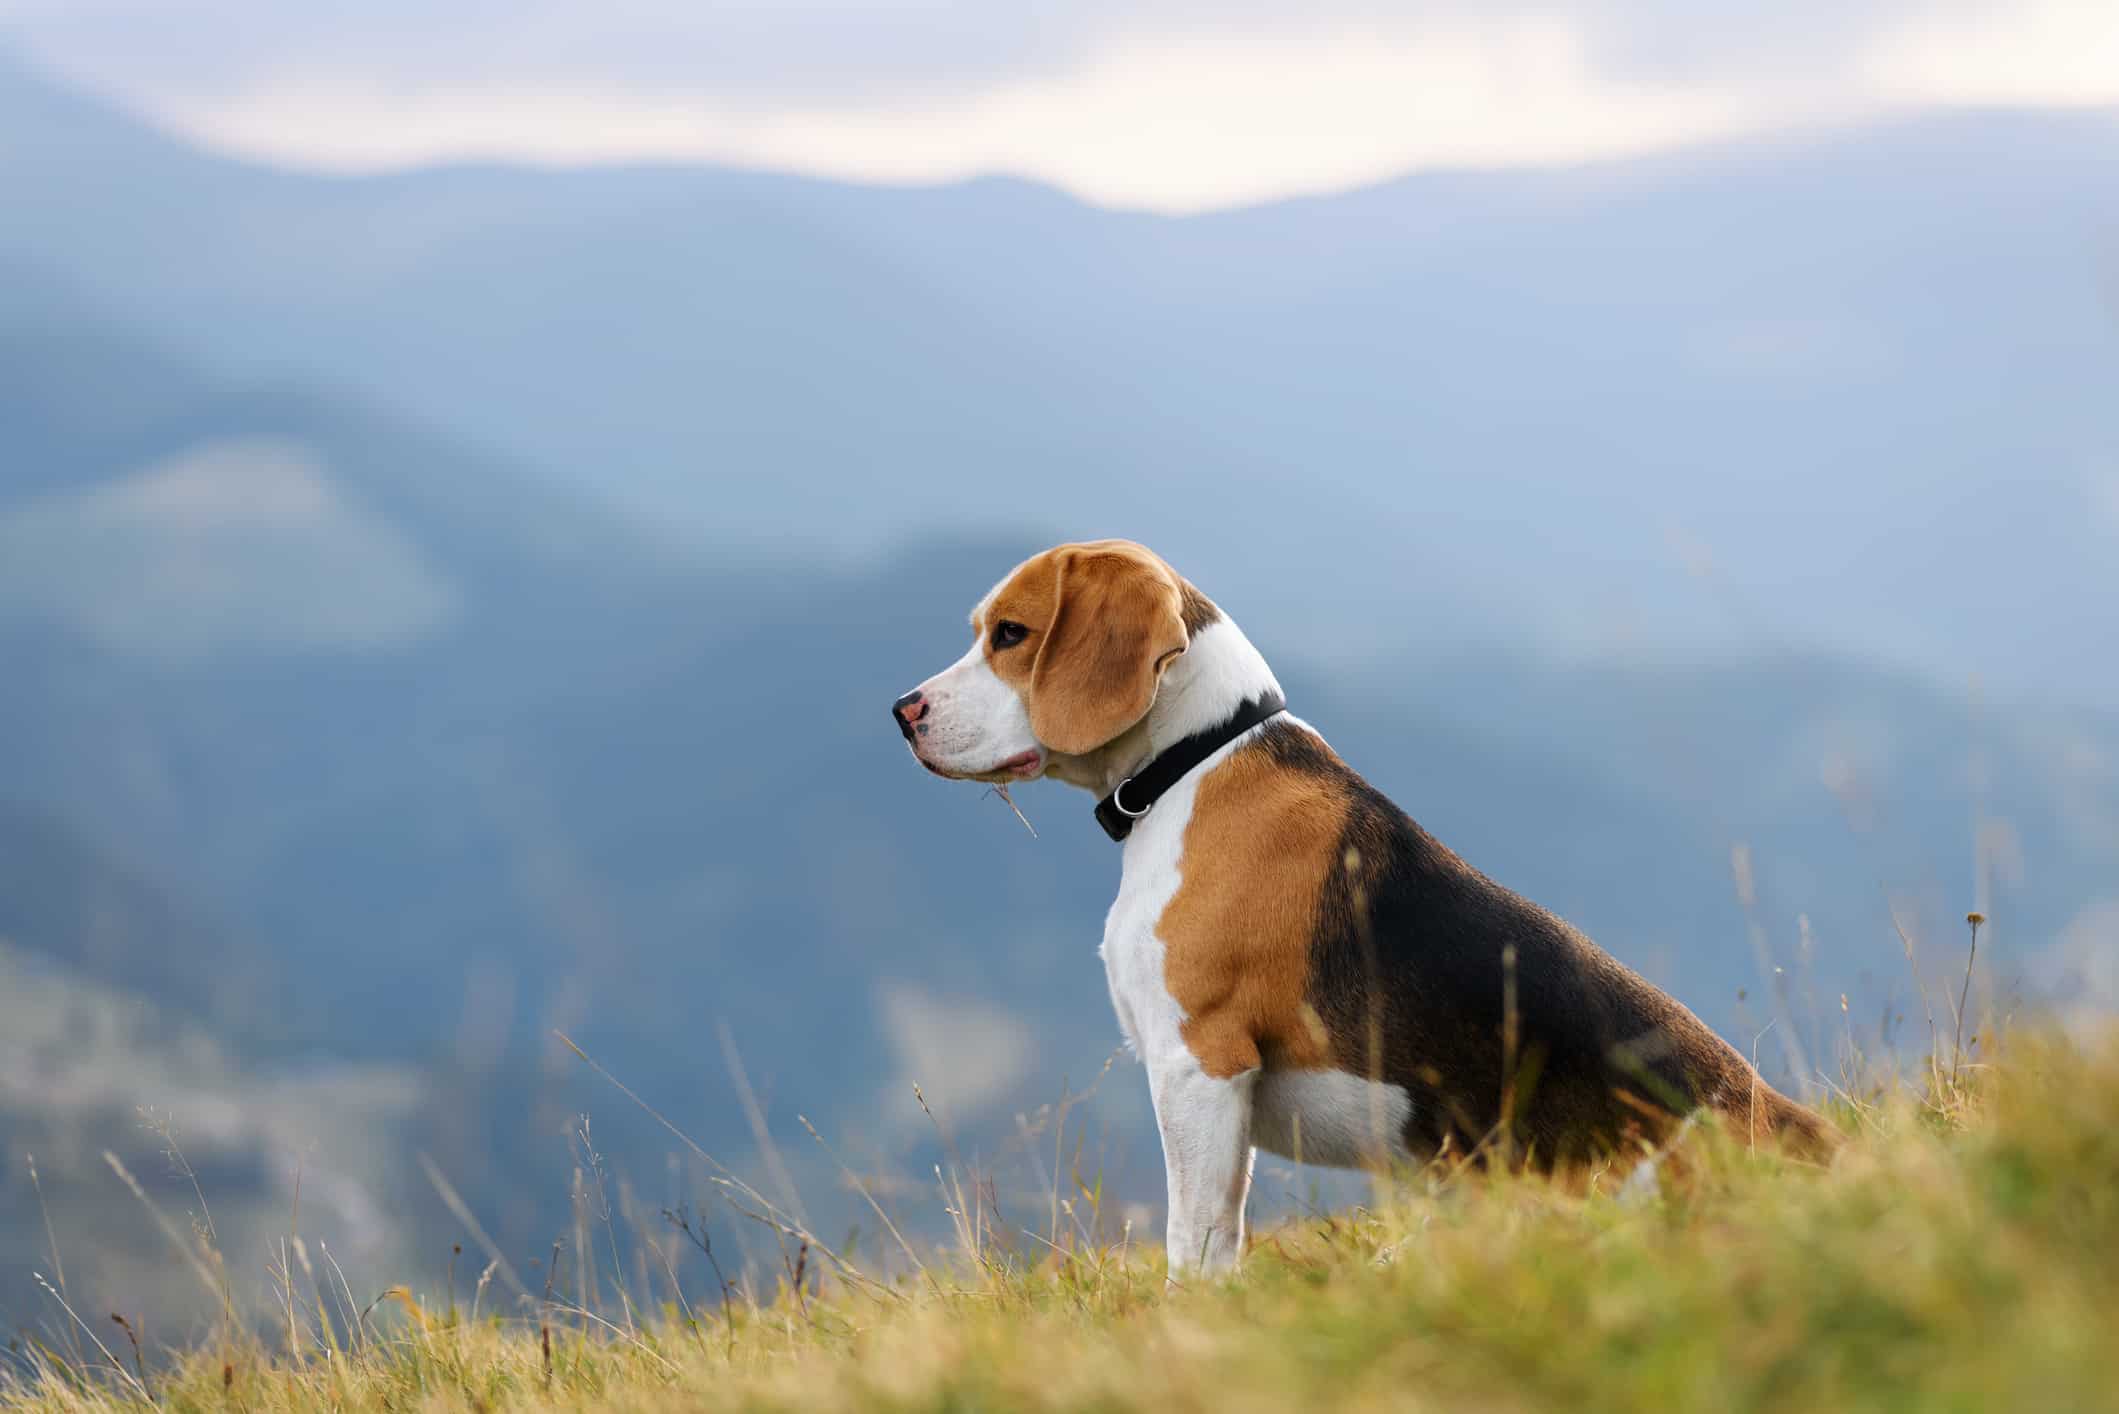 beagle dog in mountains